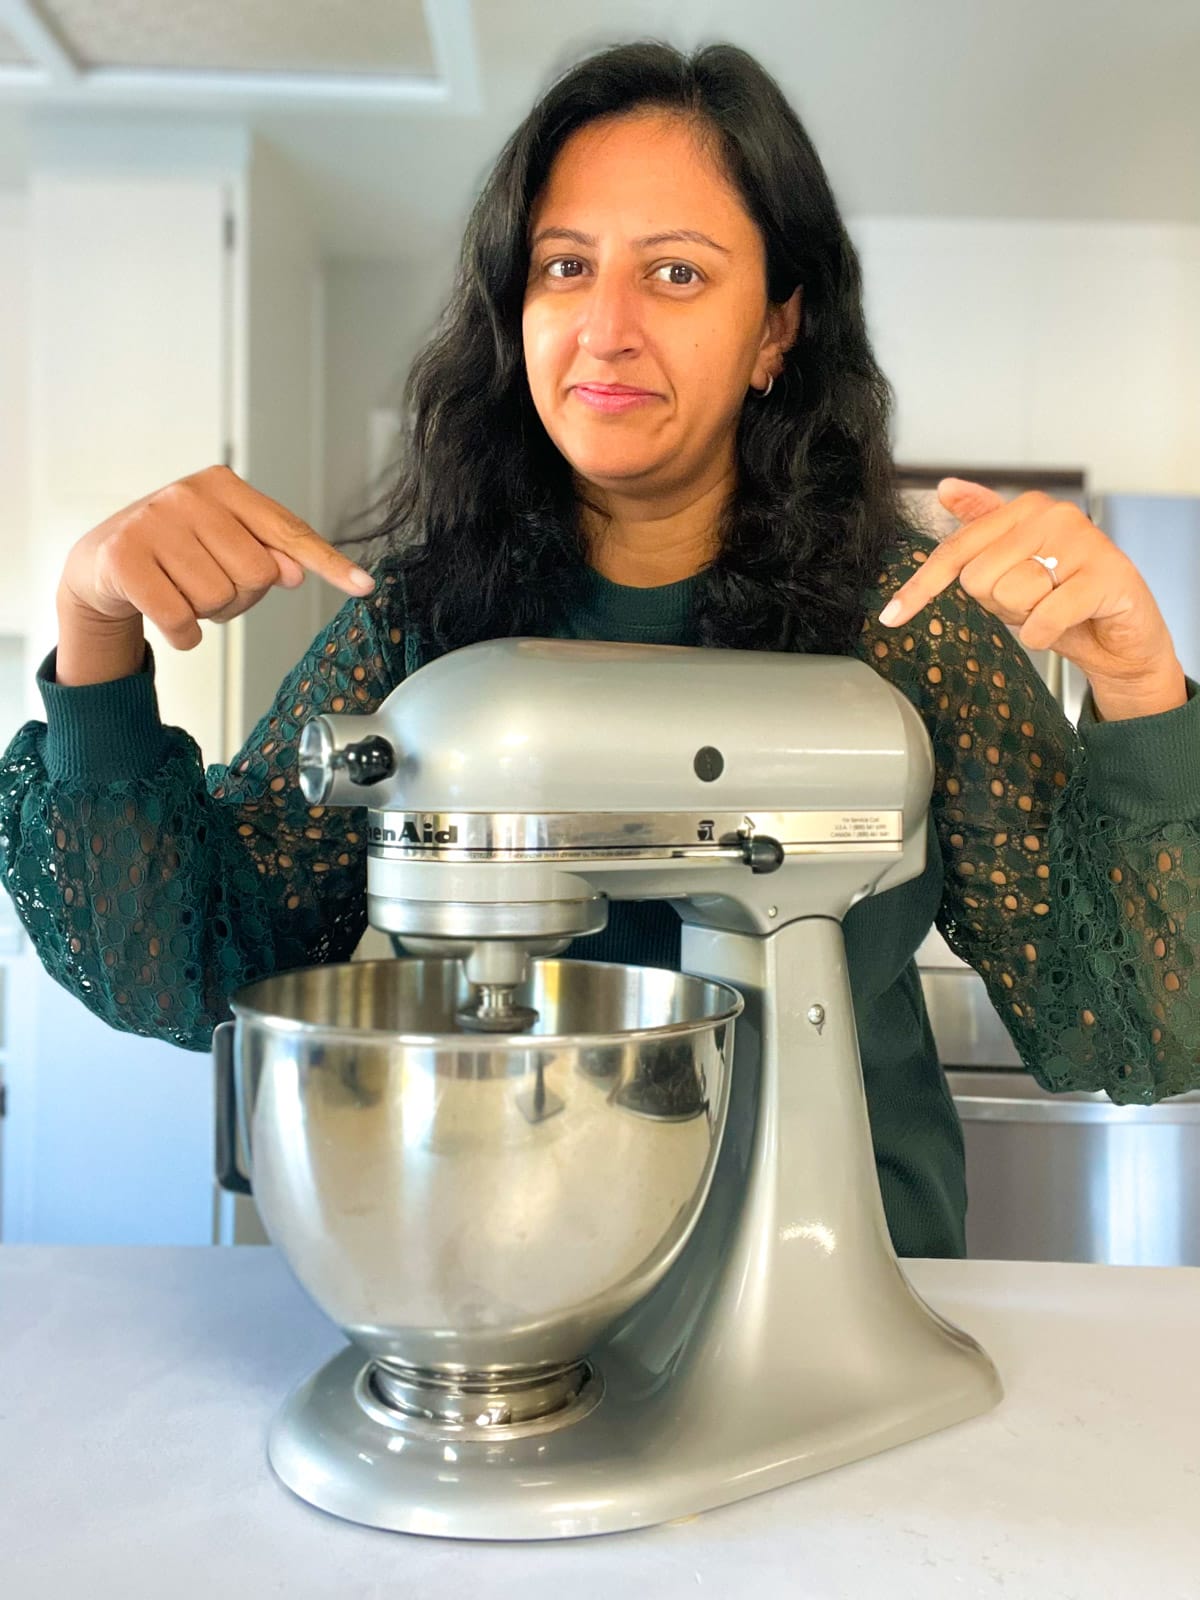 https://pipingpotcurry.com/wp-content/uploads/2021/11/Kitchenaid-Piping-Pot-Curry-1.jpg